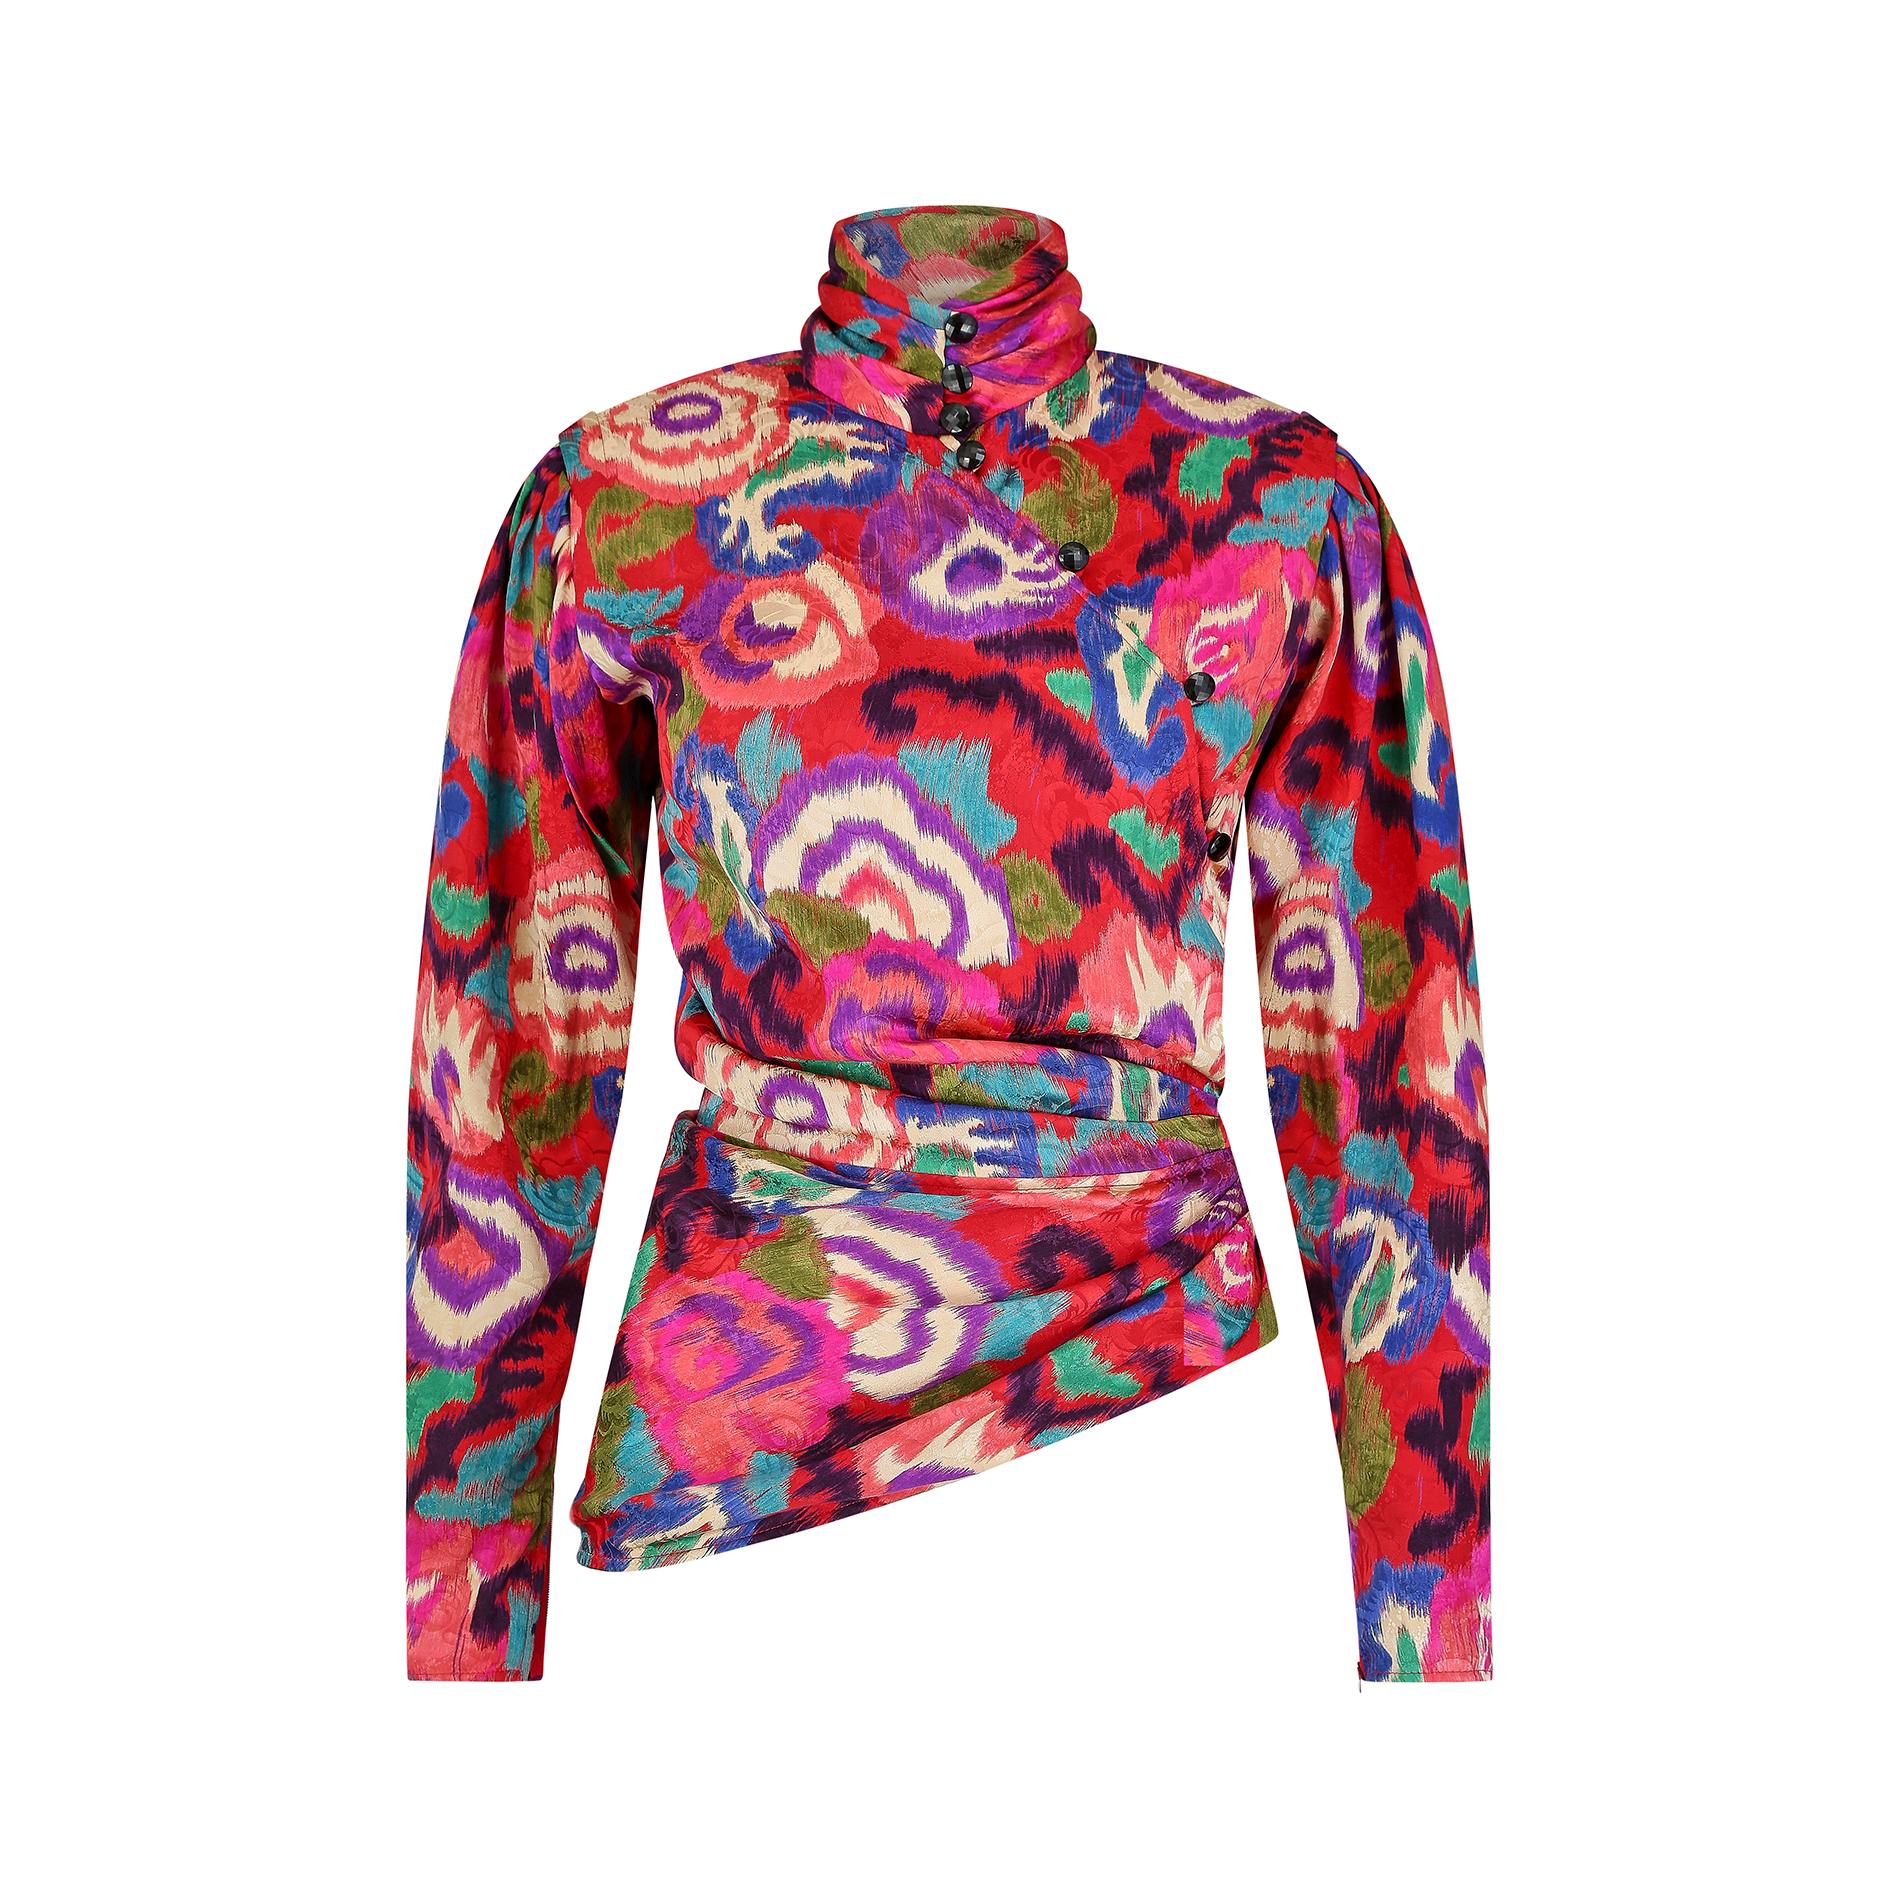 Fabulous silk asymmetric jacket by Emmanuel Ungaro, circa 1986, in a colourful abstract floral print. This was a signature look of the designer and was revisited throughout the collections of the mid 1980s to early 1990s in a dazzling array of